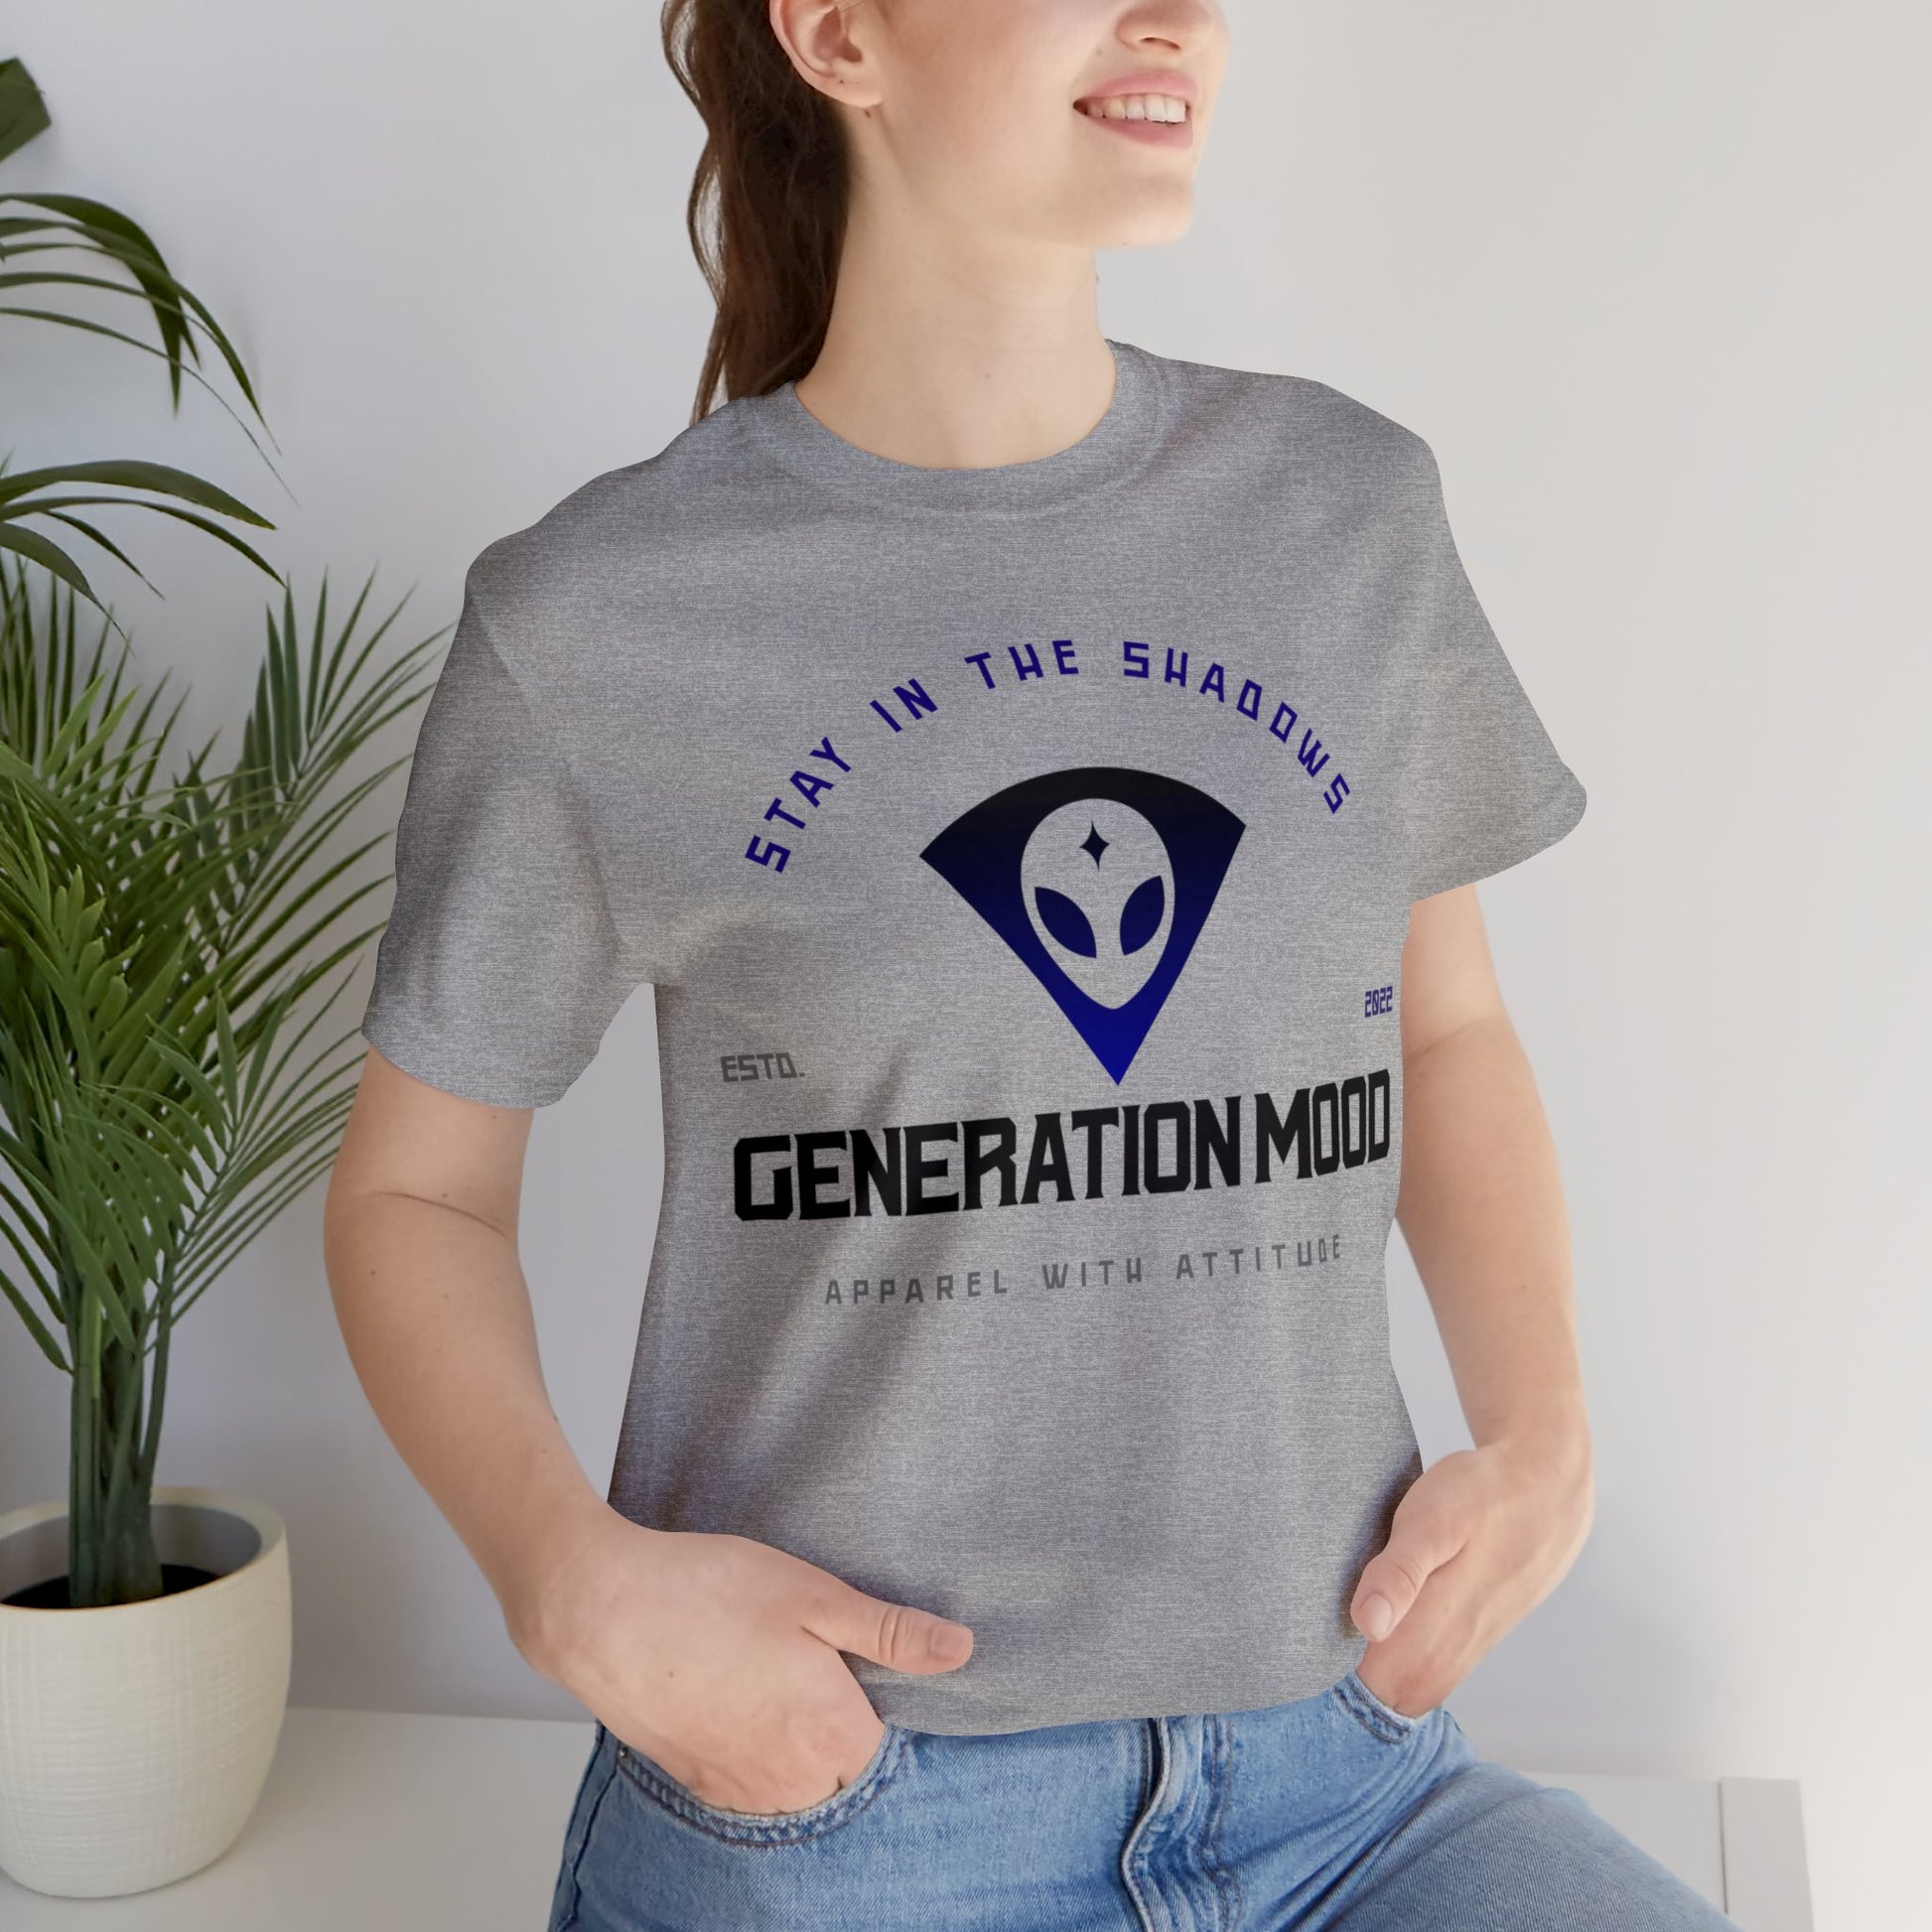 Are you ready to channel your inner cosmic wanderer? Our exclusive Generation Mood logo alien t-shirt combines nostalgia and a dash of intergalactic cool. Whether you are a believer in little beings or just love a good logo tee, this shirt is for you. In Grey